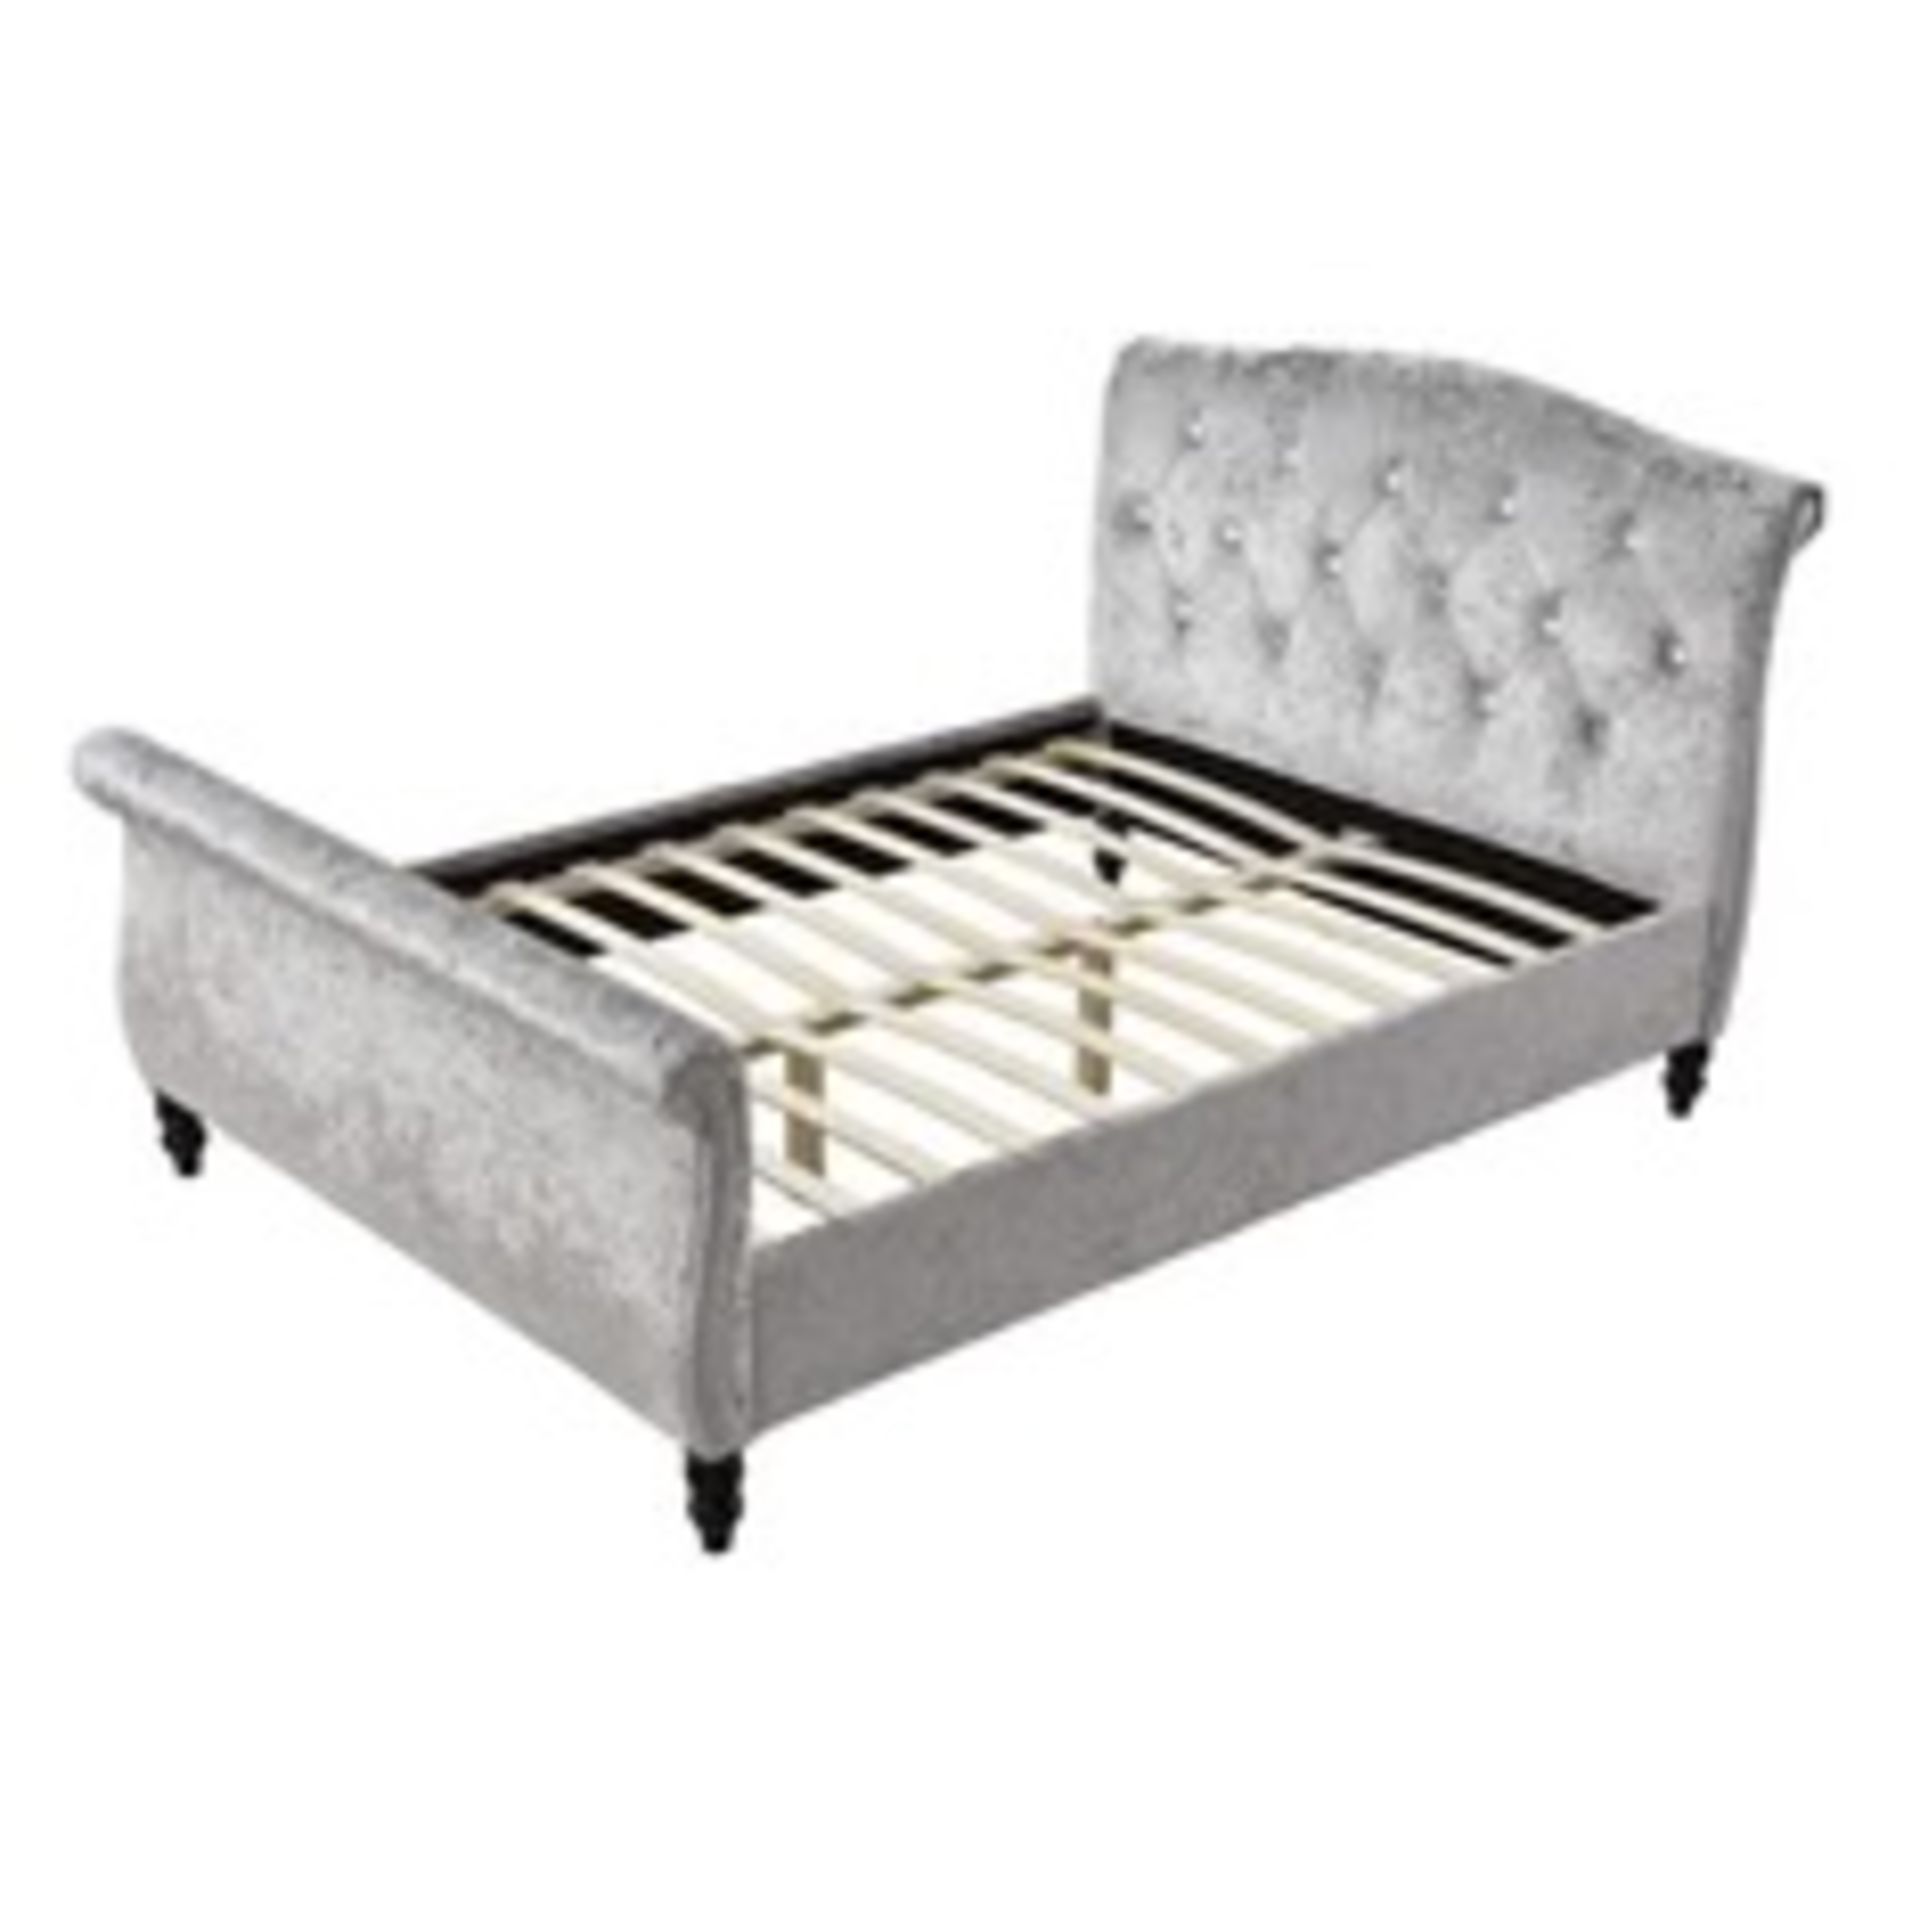 10 X MEISSA CRUSHED VELVET UPHOLSTERED SLEIGH DOUBLE BED WITH DIAMANTE HEADBOARD, SILVER - Image 2 of 3